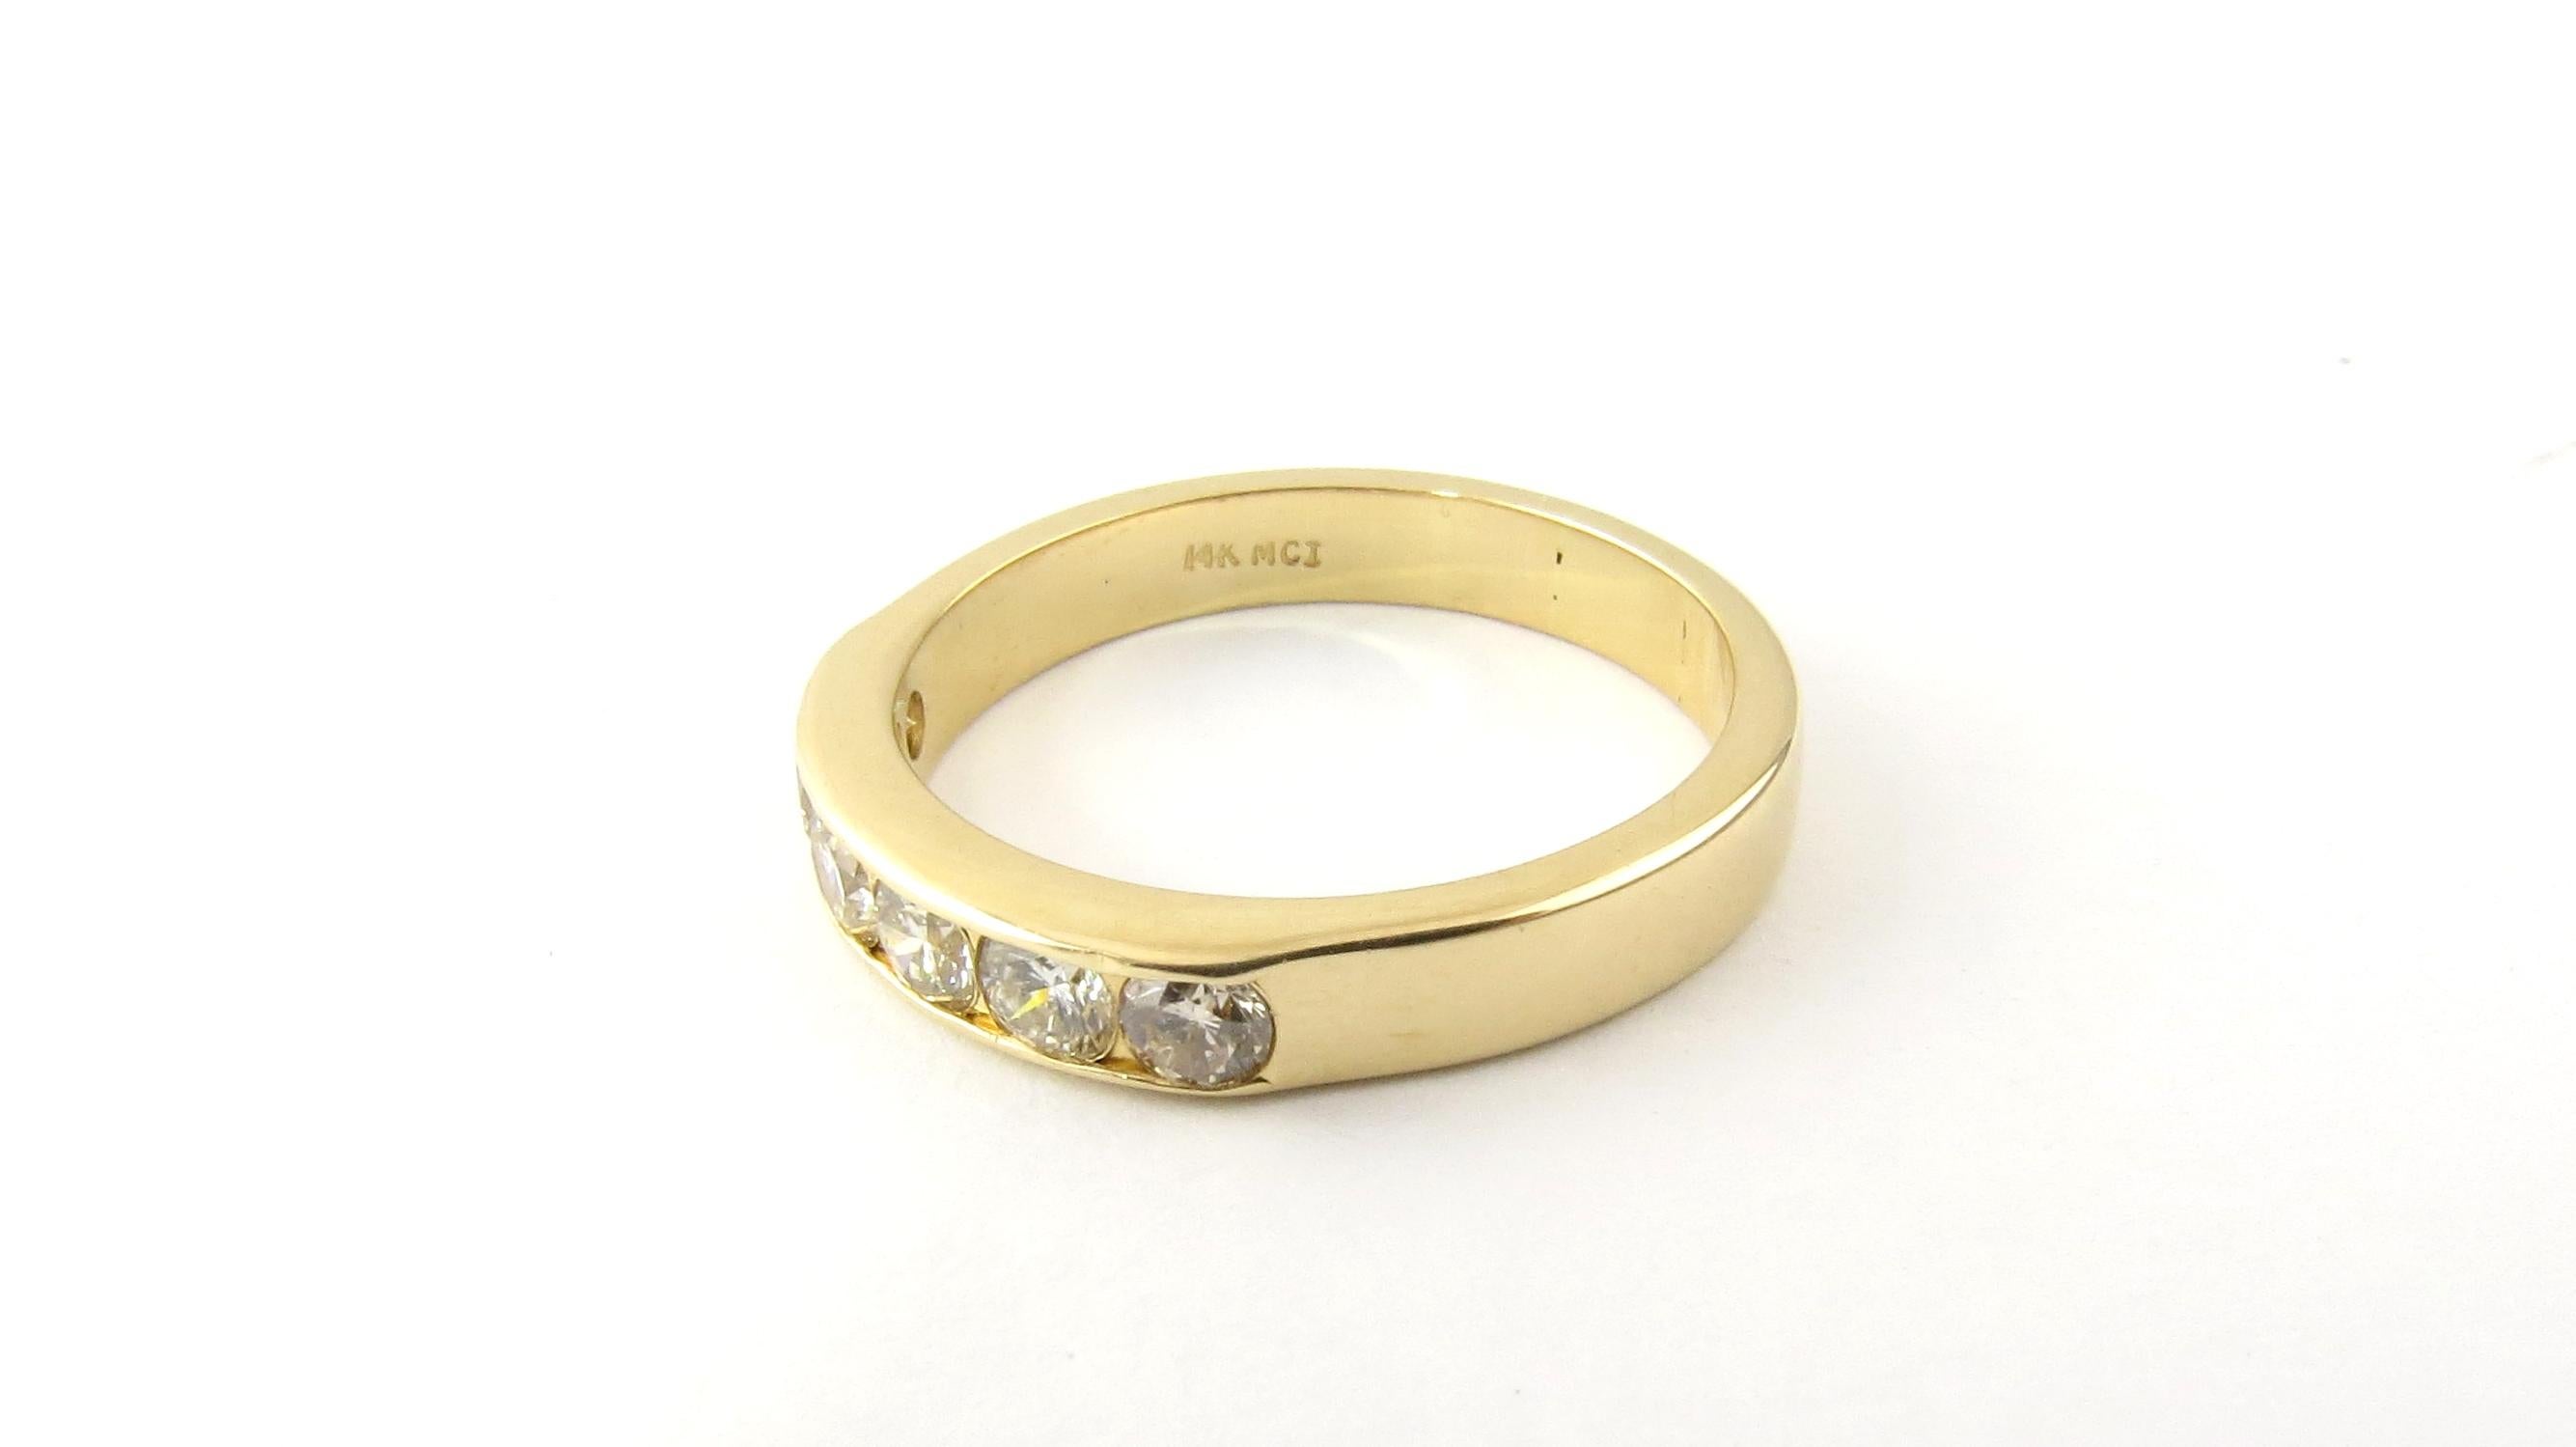 Vintage 14 Karat Yellow Gold and Diamond Wedding Band Size 8

This sparkling band features six round brilliant cut diamonds set in polished 14K yellow gold. Width: 4 mm. 
Shank: 3 mm.

Approximate total diamond weight: .60 ct.

Diamond color: